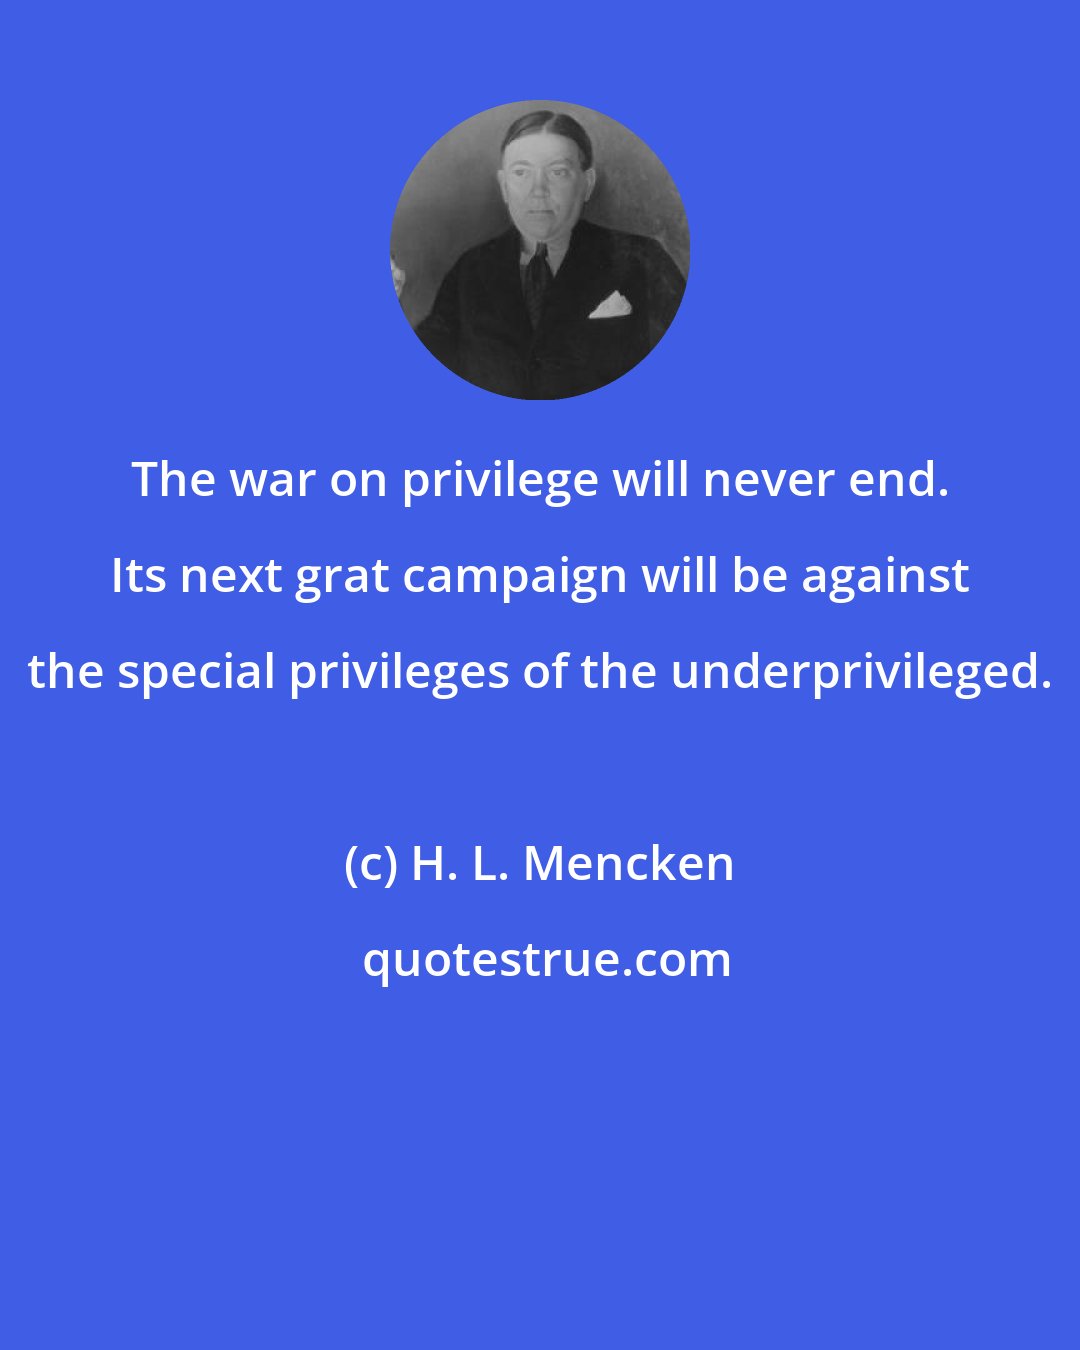 H. L. Mencken: The war on privilege will never end. Its next grat campaign will be against the special privileges of the underprivileged.